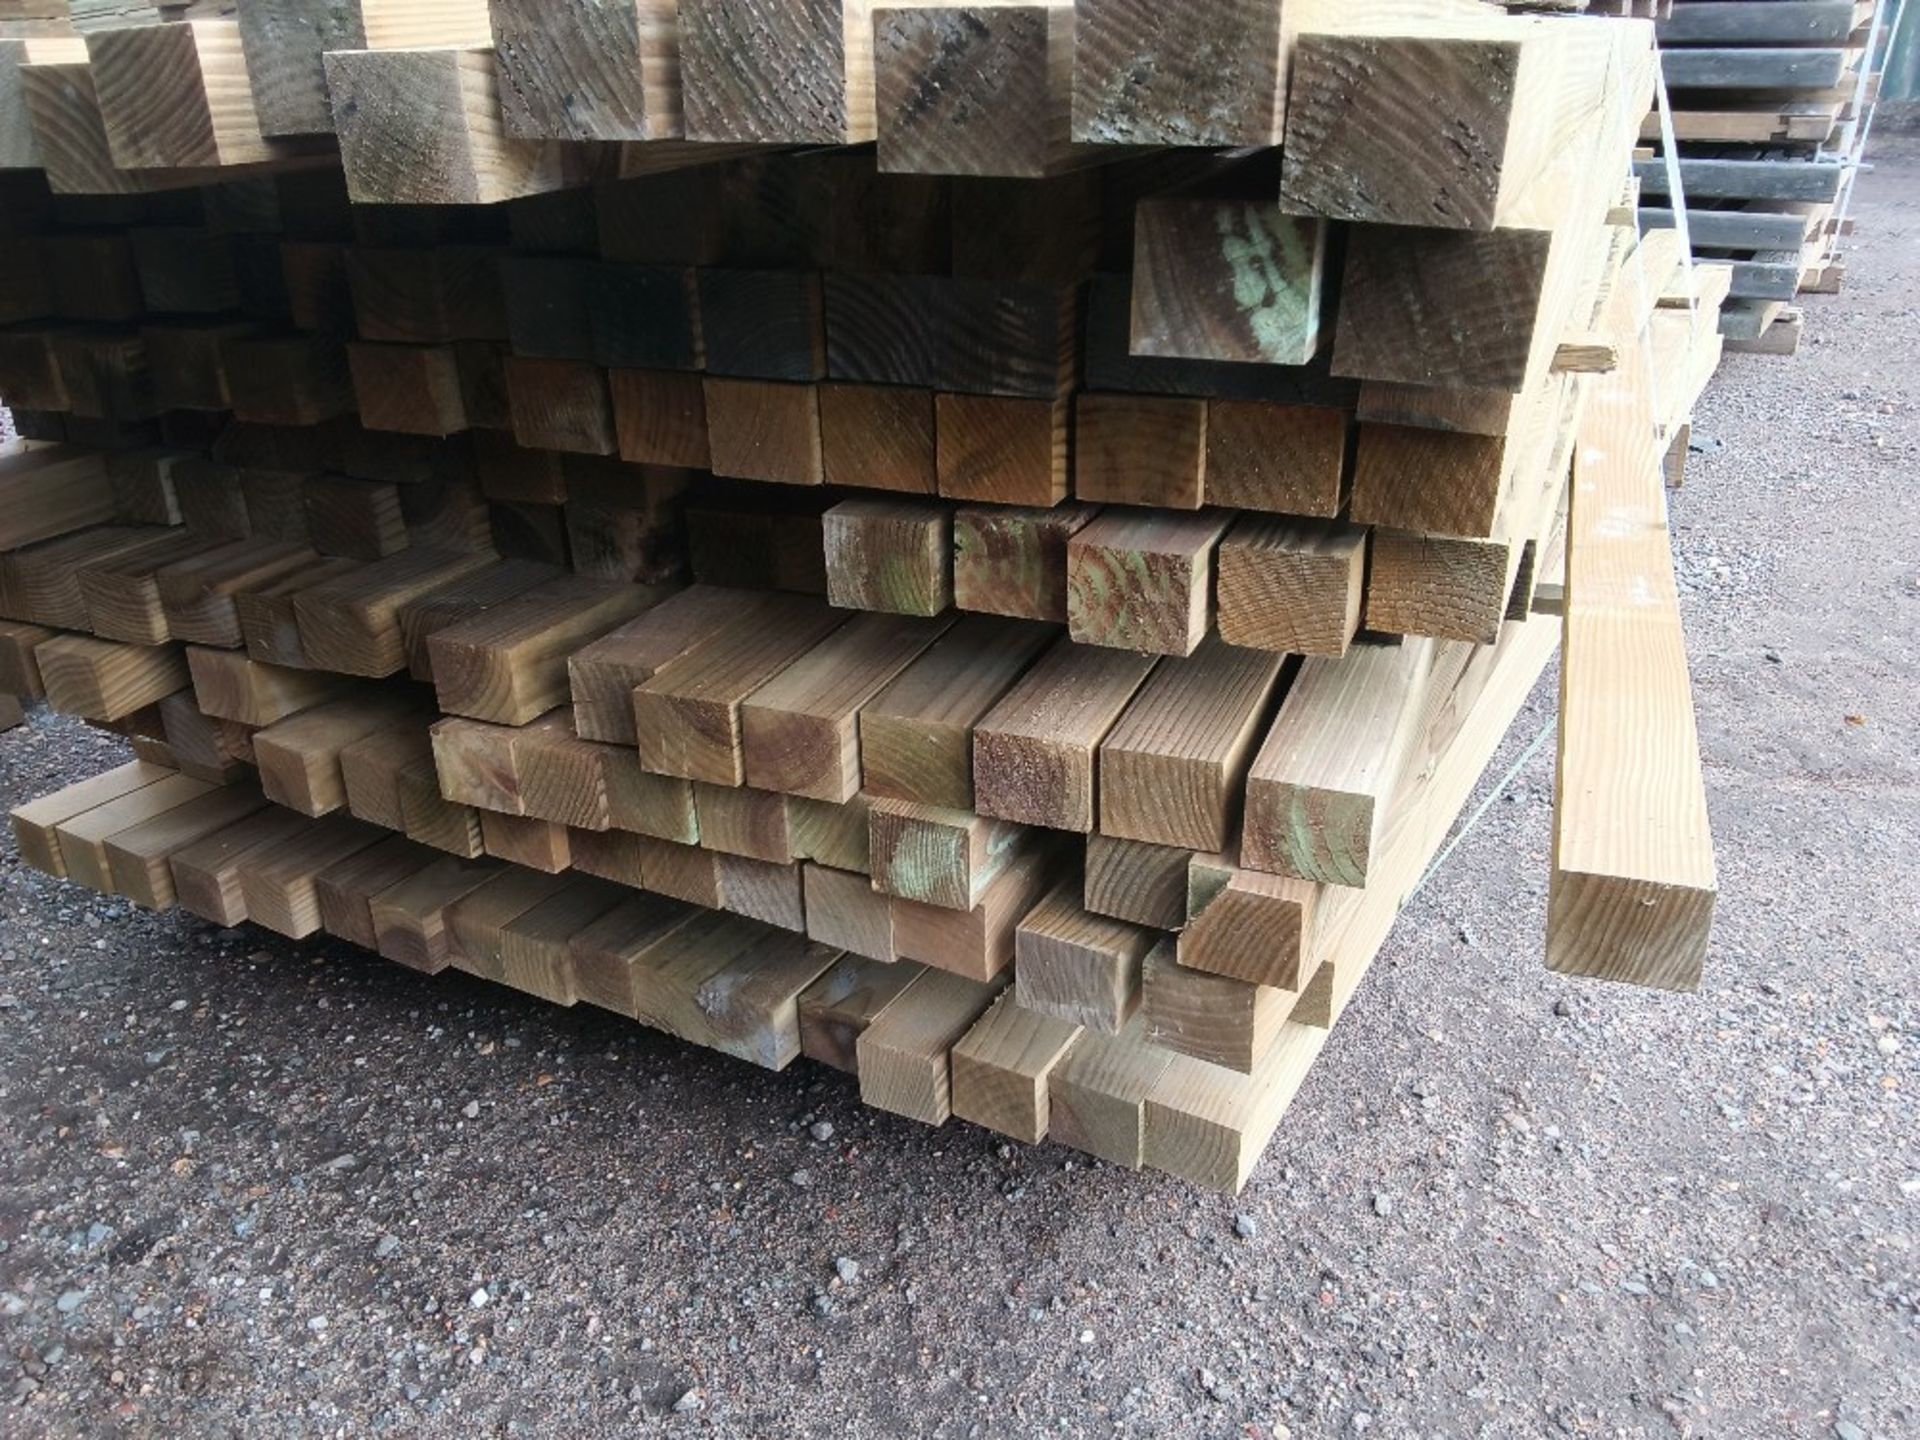 BUNDLE OF TREATED TIMBER BATTENS/POSTS MAINLY 55 X 45MM APPROX @ 2.2M-2.7M LENGTH, 200NO PIECES IN T - Image 3 of 3